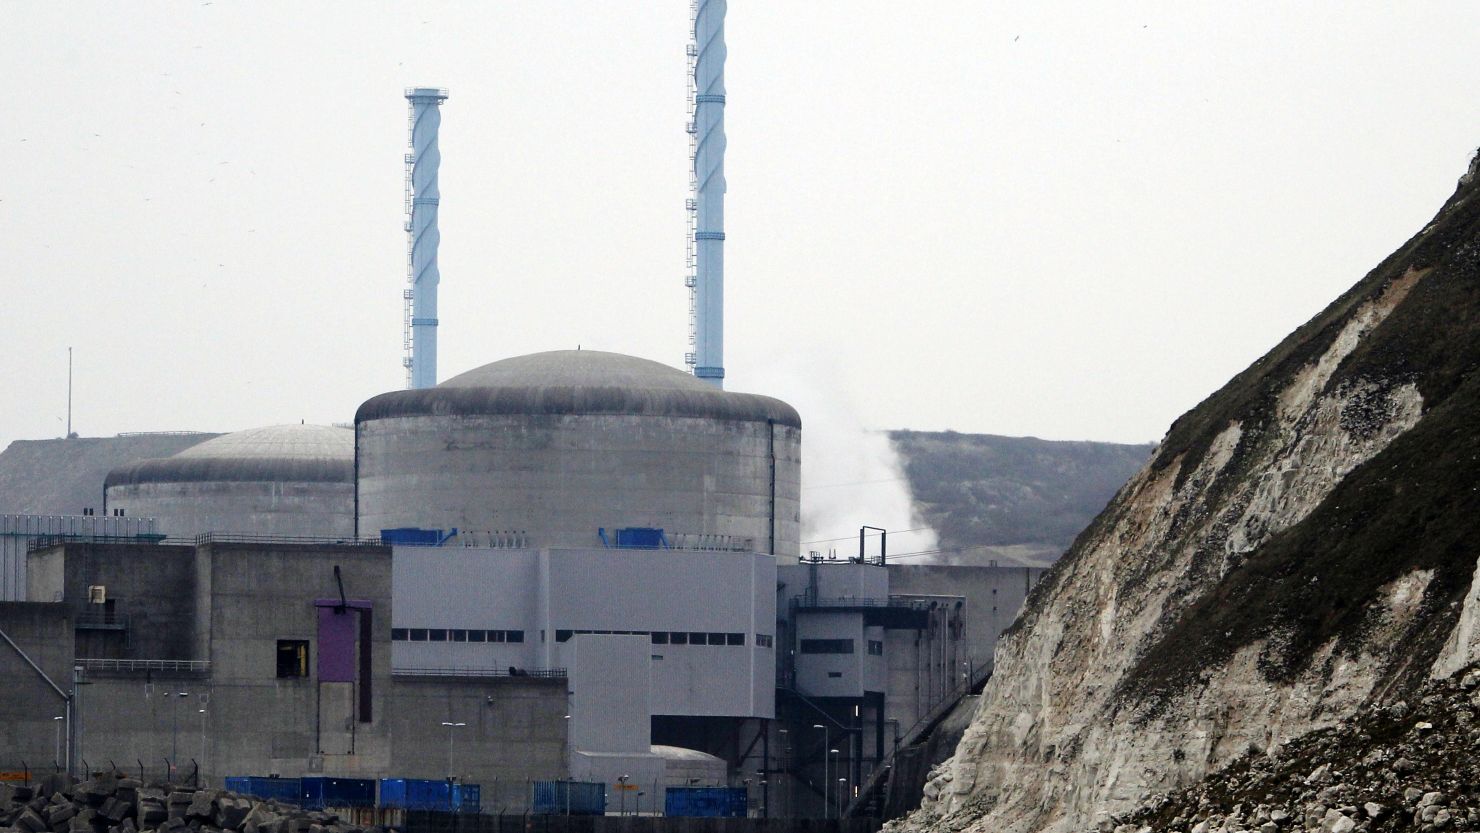 The Penly nuclear power plant  in Western France after a nuclear reactor shut down automatically on April 5.